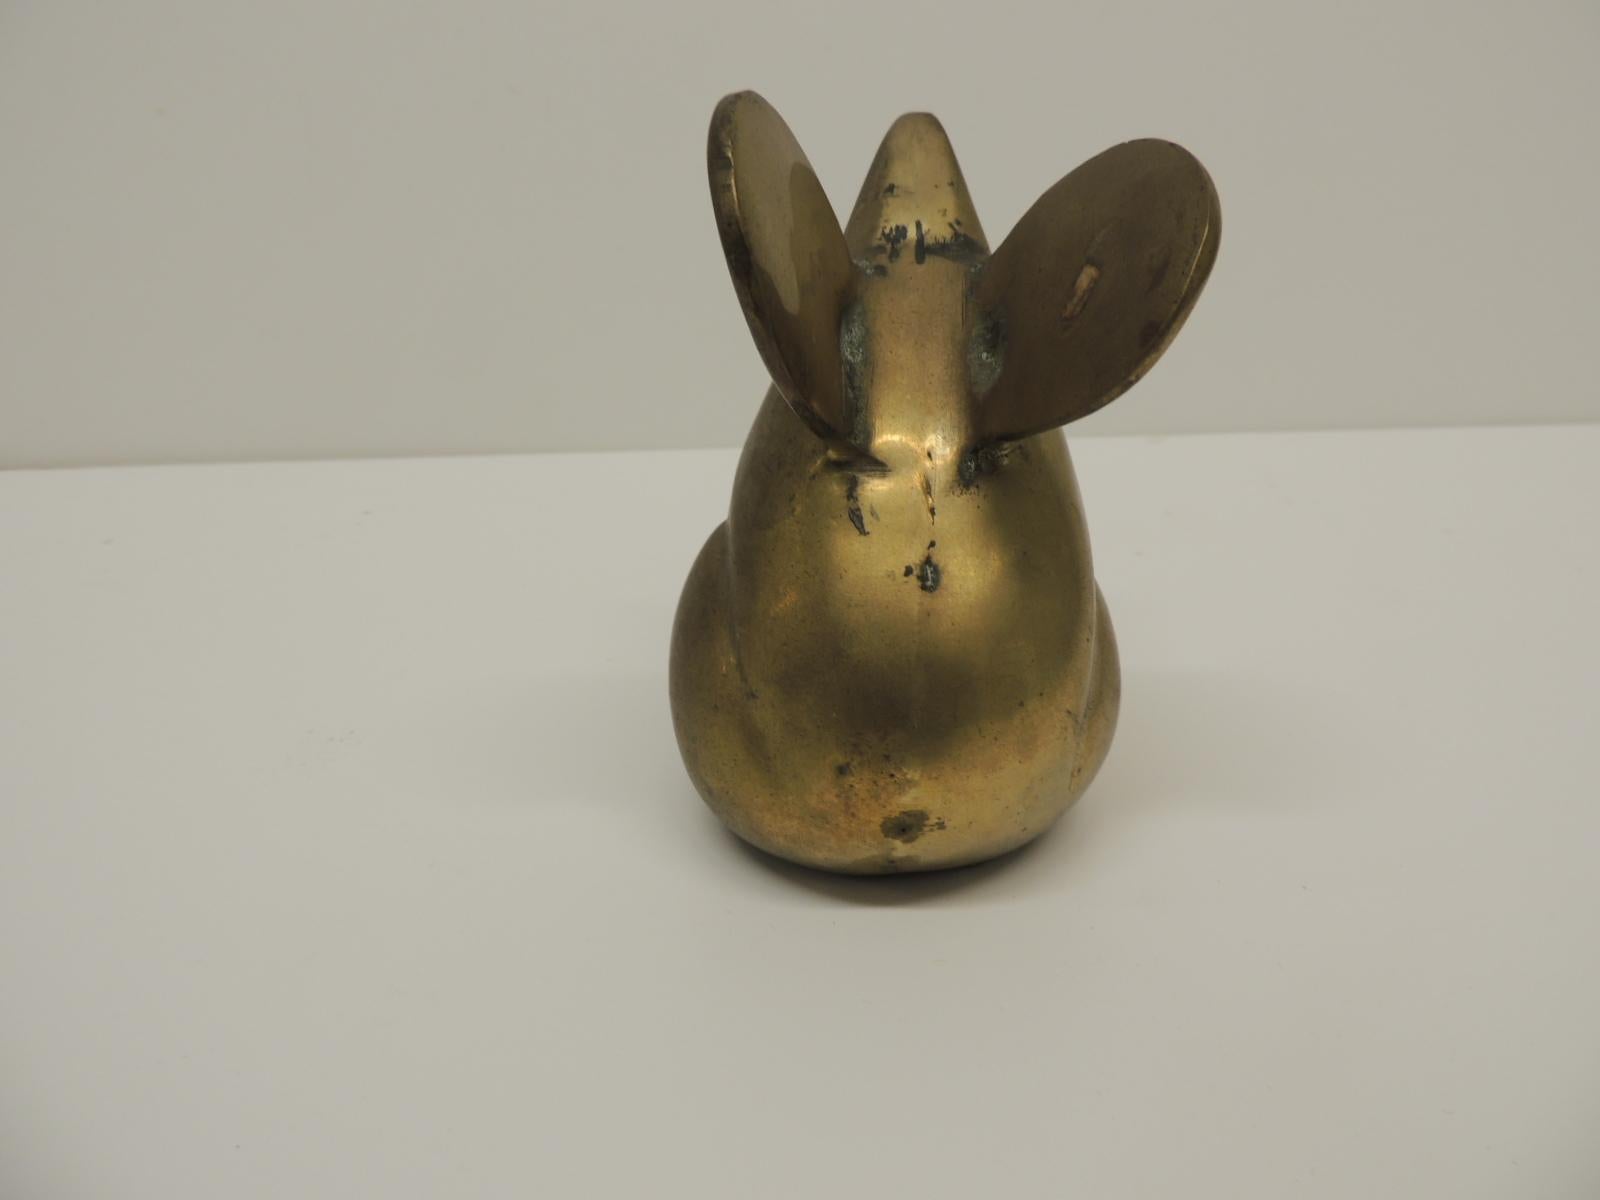 Vintage solid brass mouse paperweight with big ears.
Size: 3 x 3 x 4.